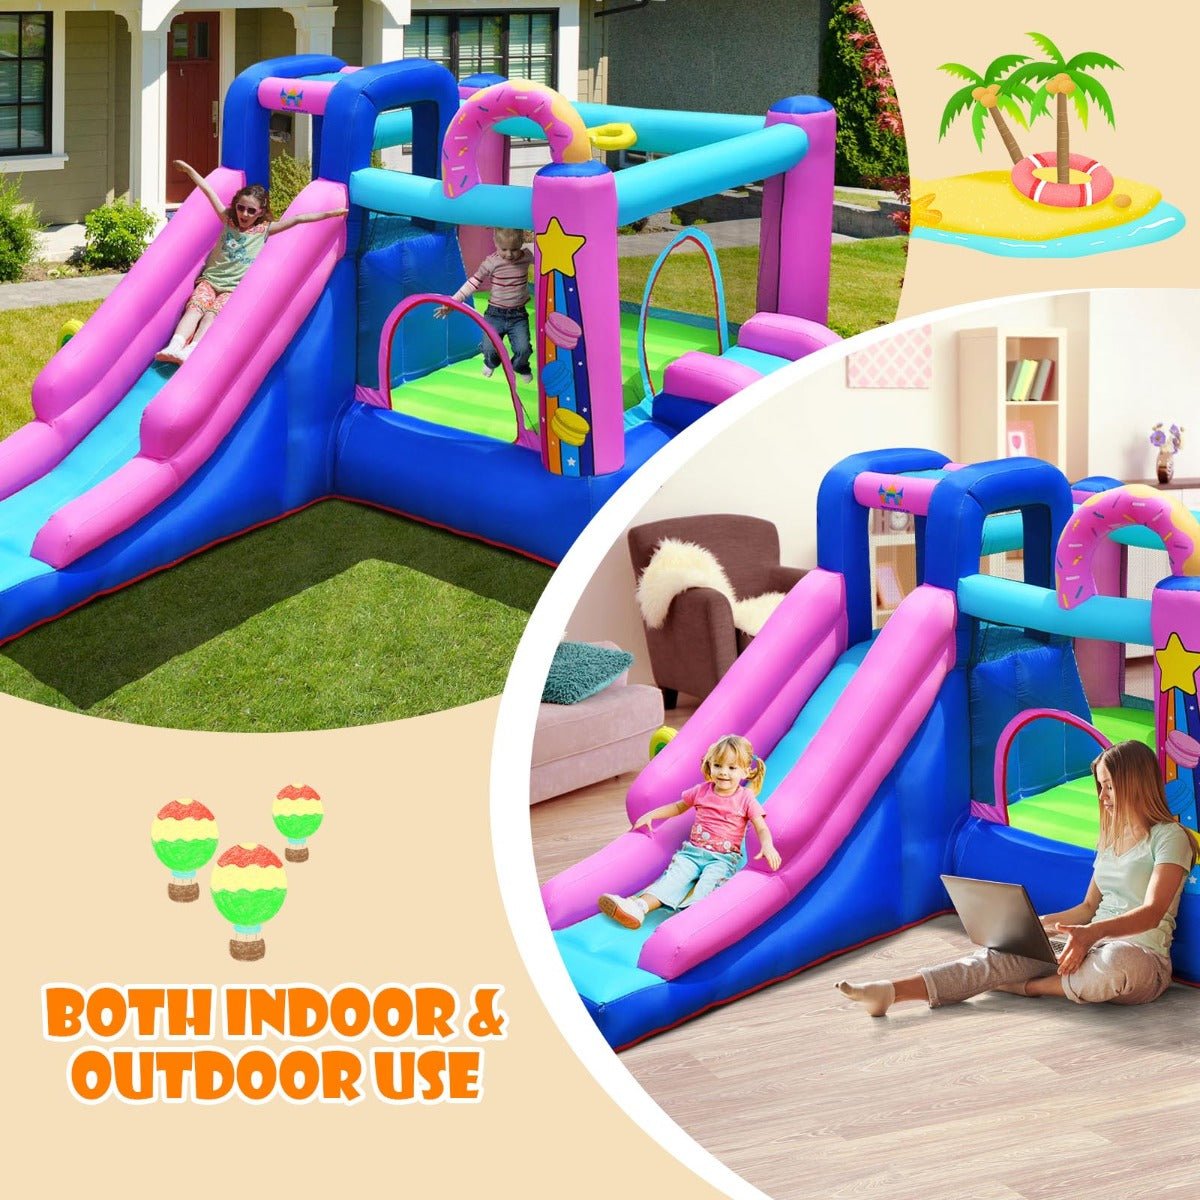 Bounce and Slide: Inflatable Playhouse with 2 Slides (Blower Included)